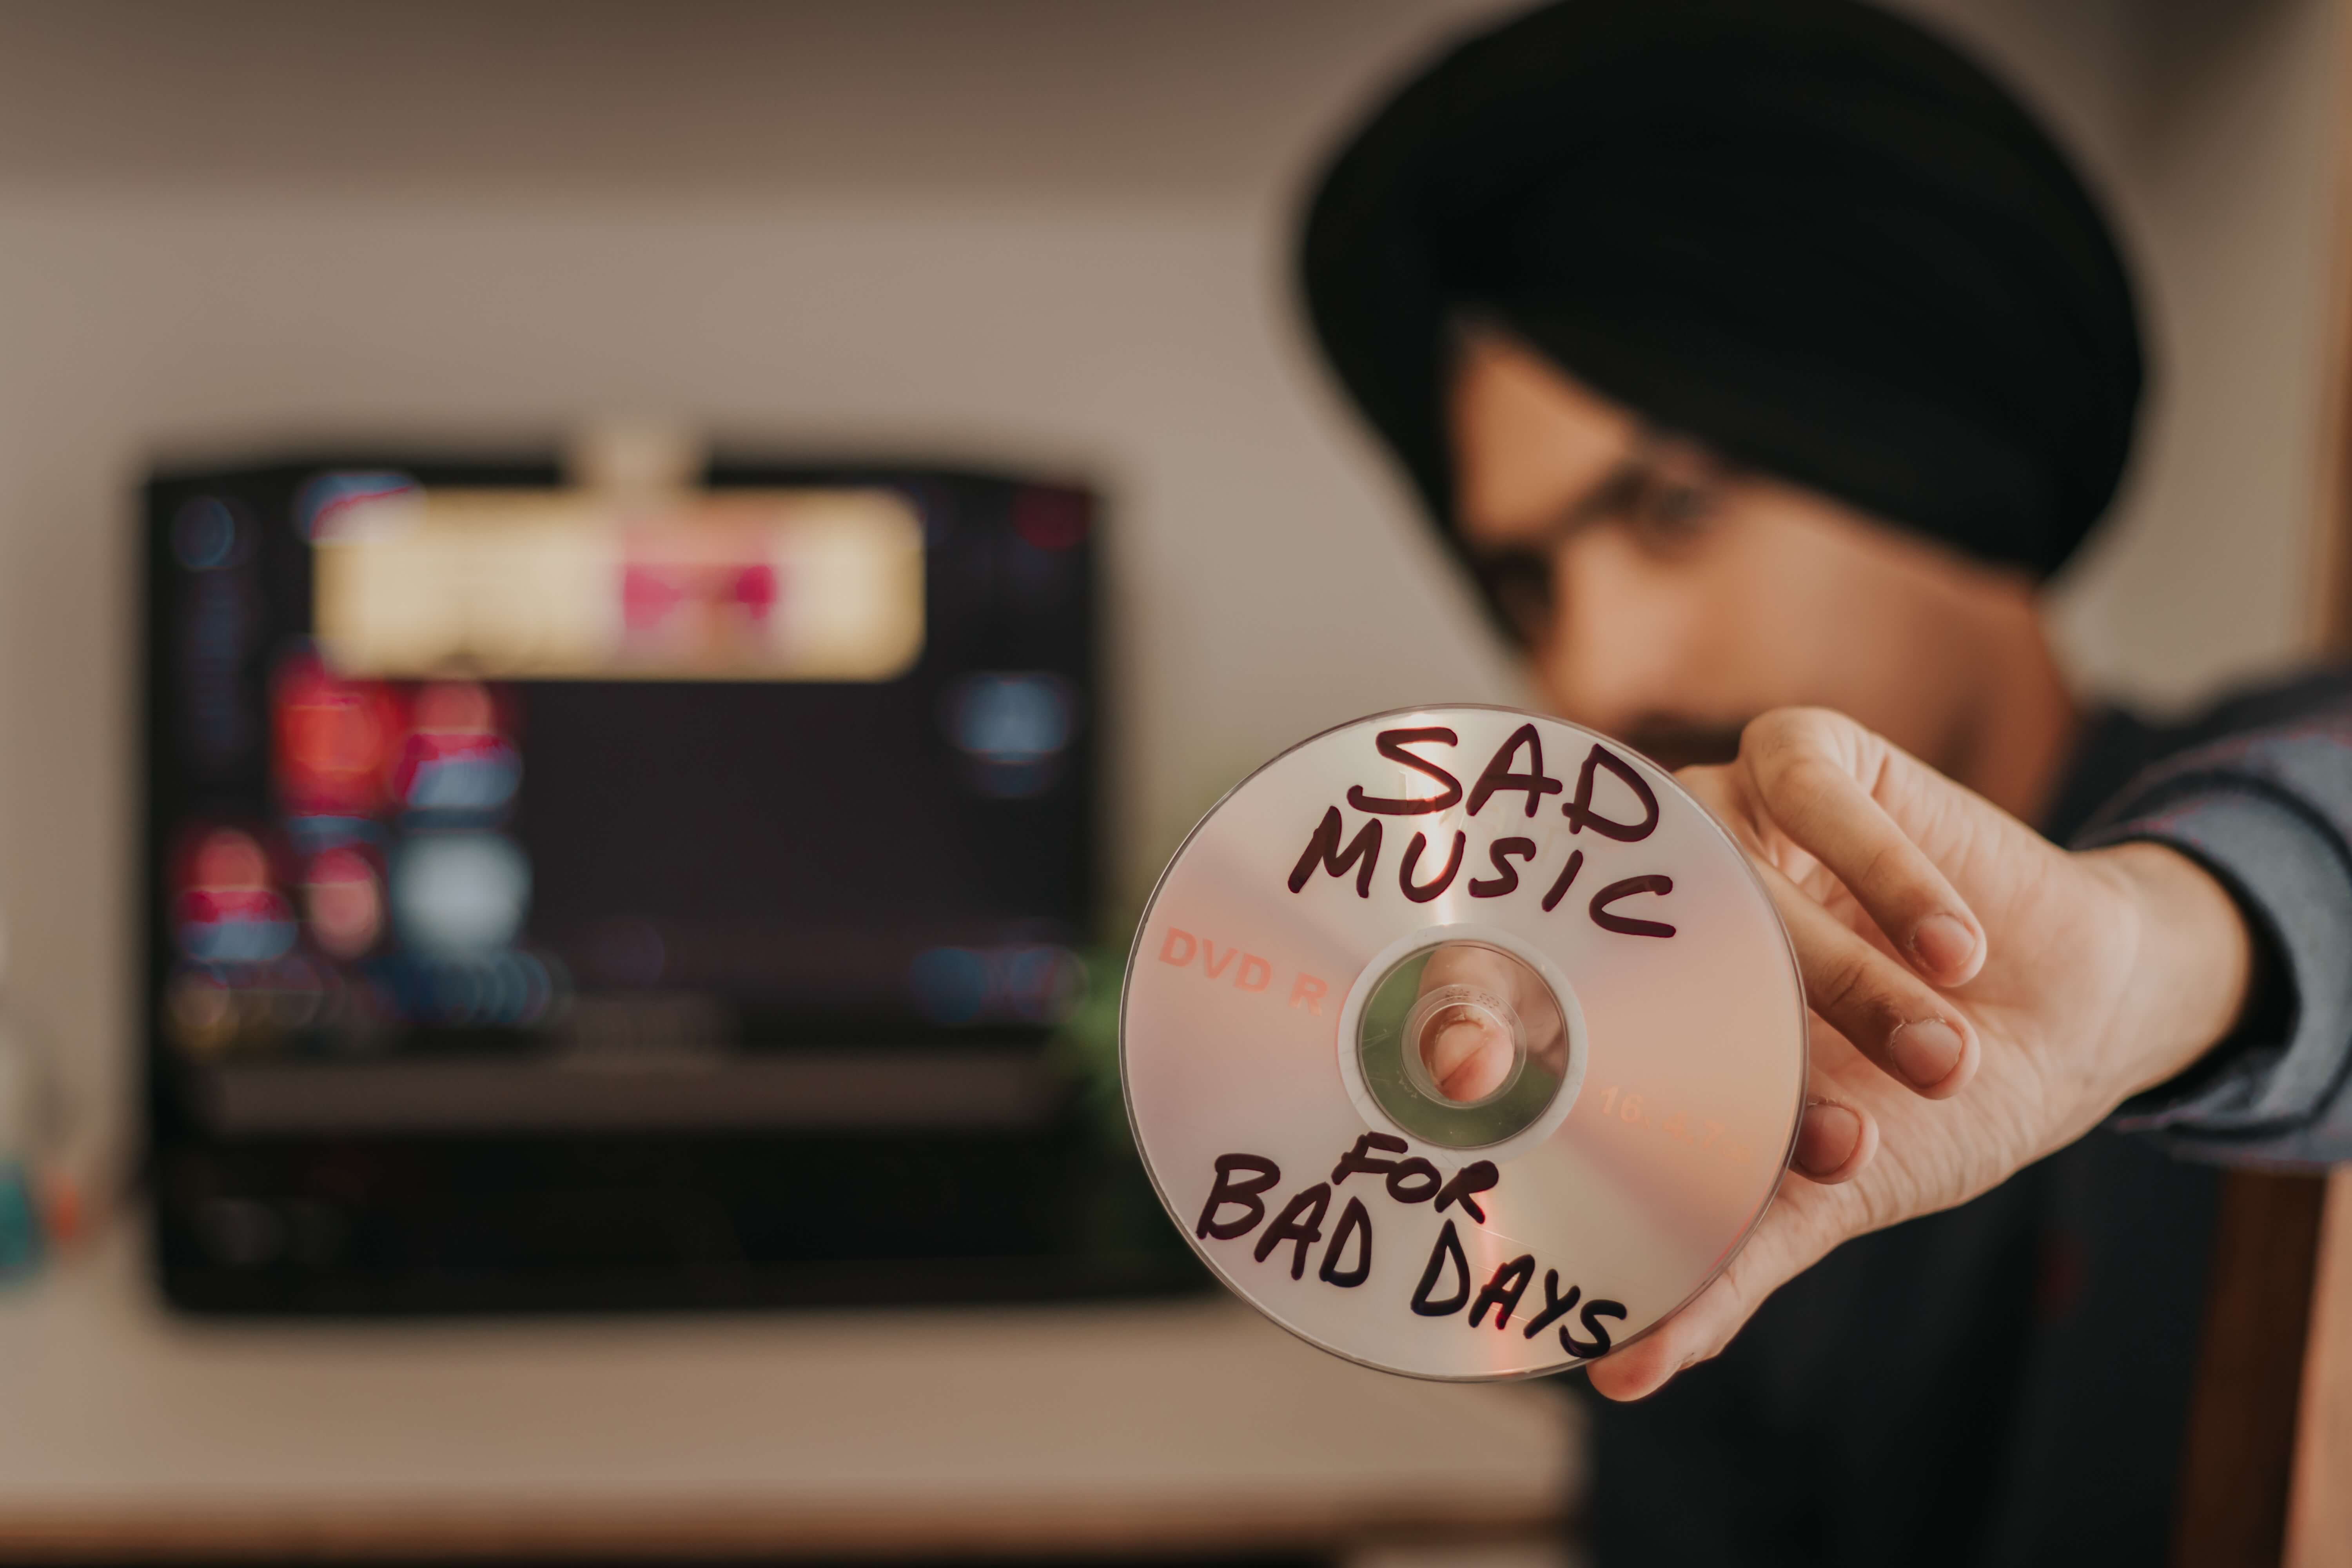 Man holding a CD which says Sad Music for Bad Days